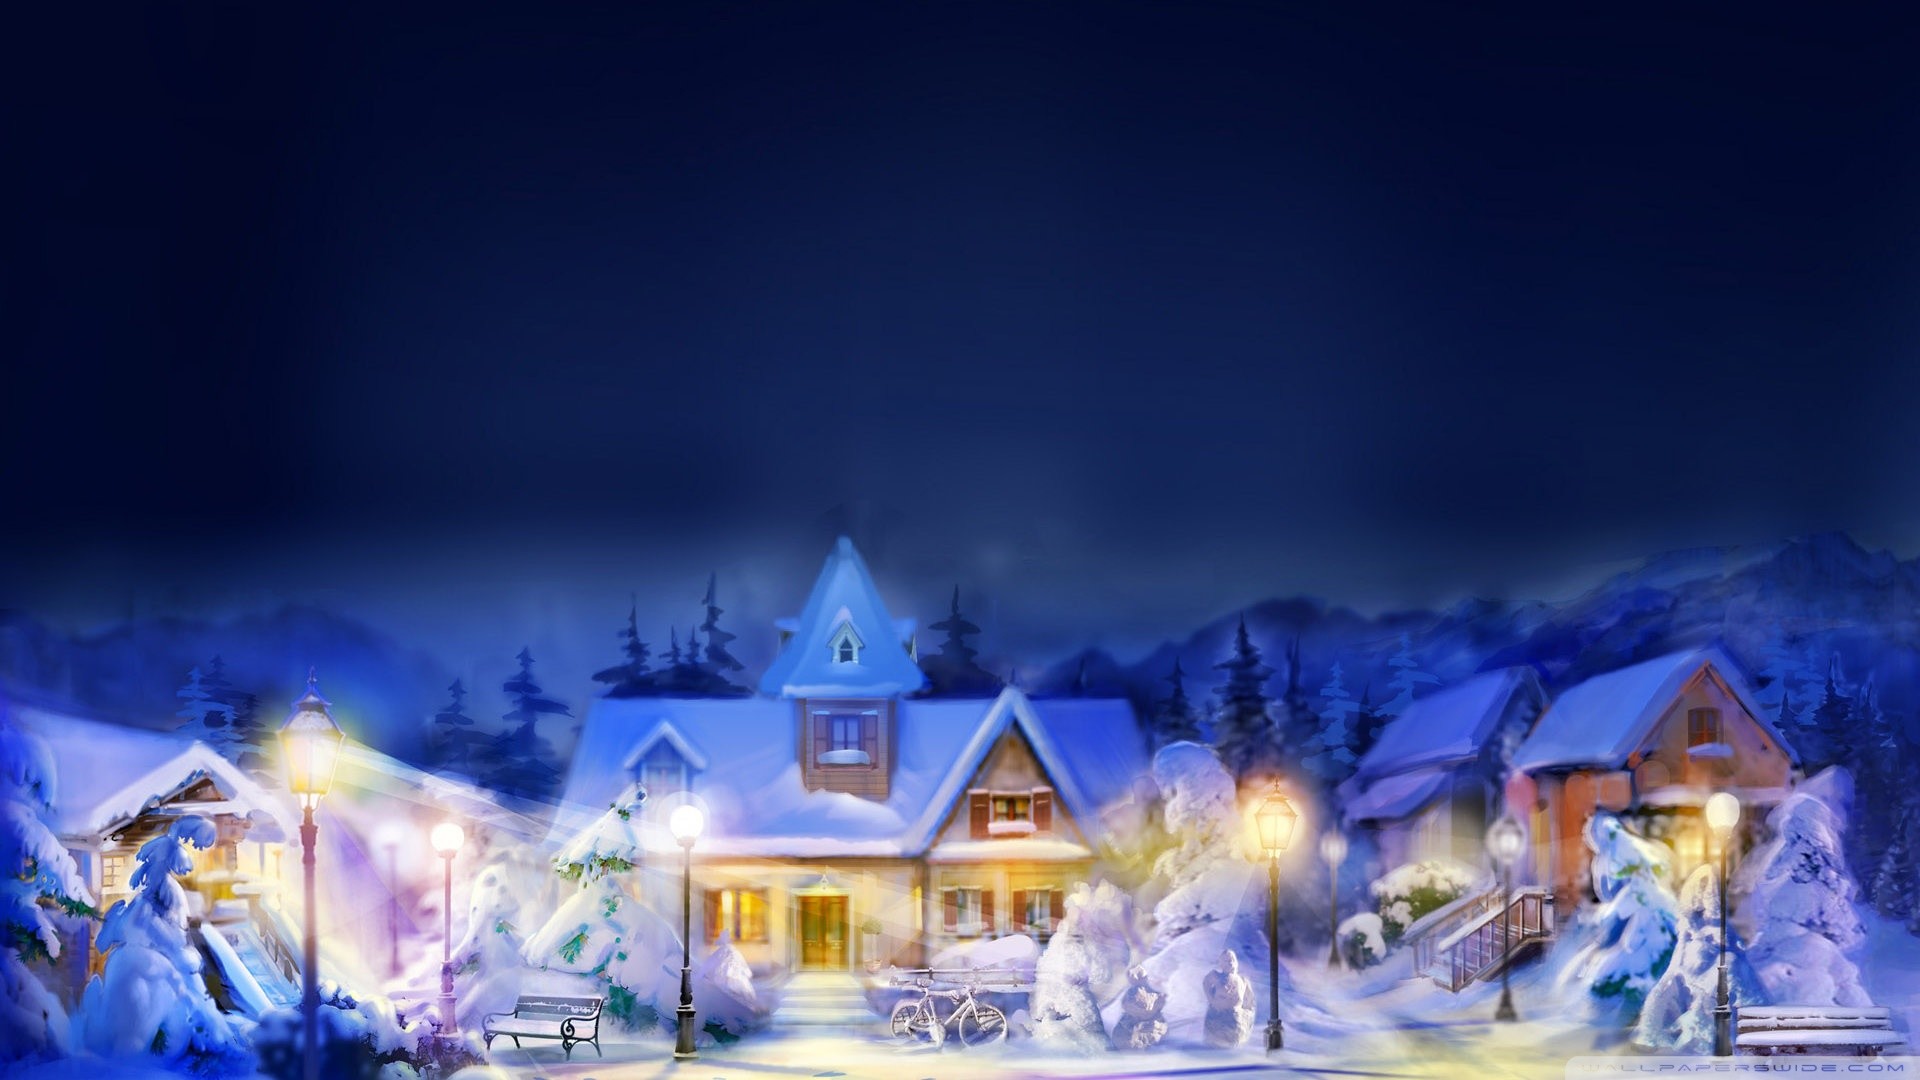 1920x1080 100 Best HD Christmas Wallpapers for Your Desktop